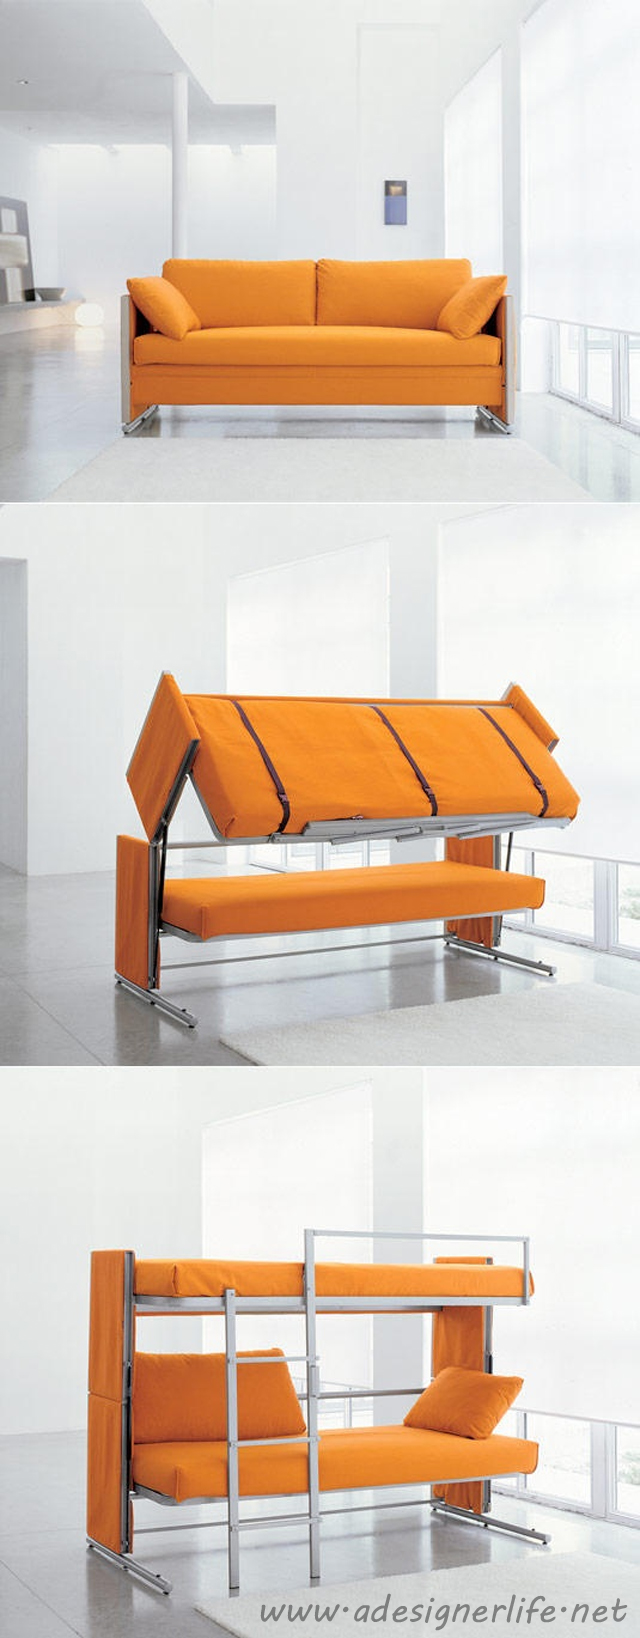 Awesome Products : The most amazing convertible furniture. Ever.